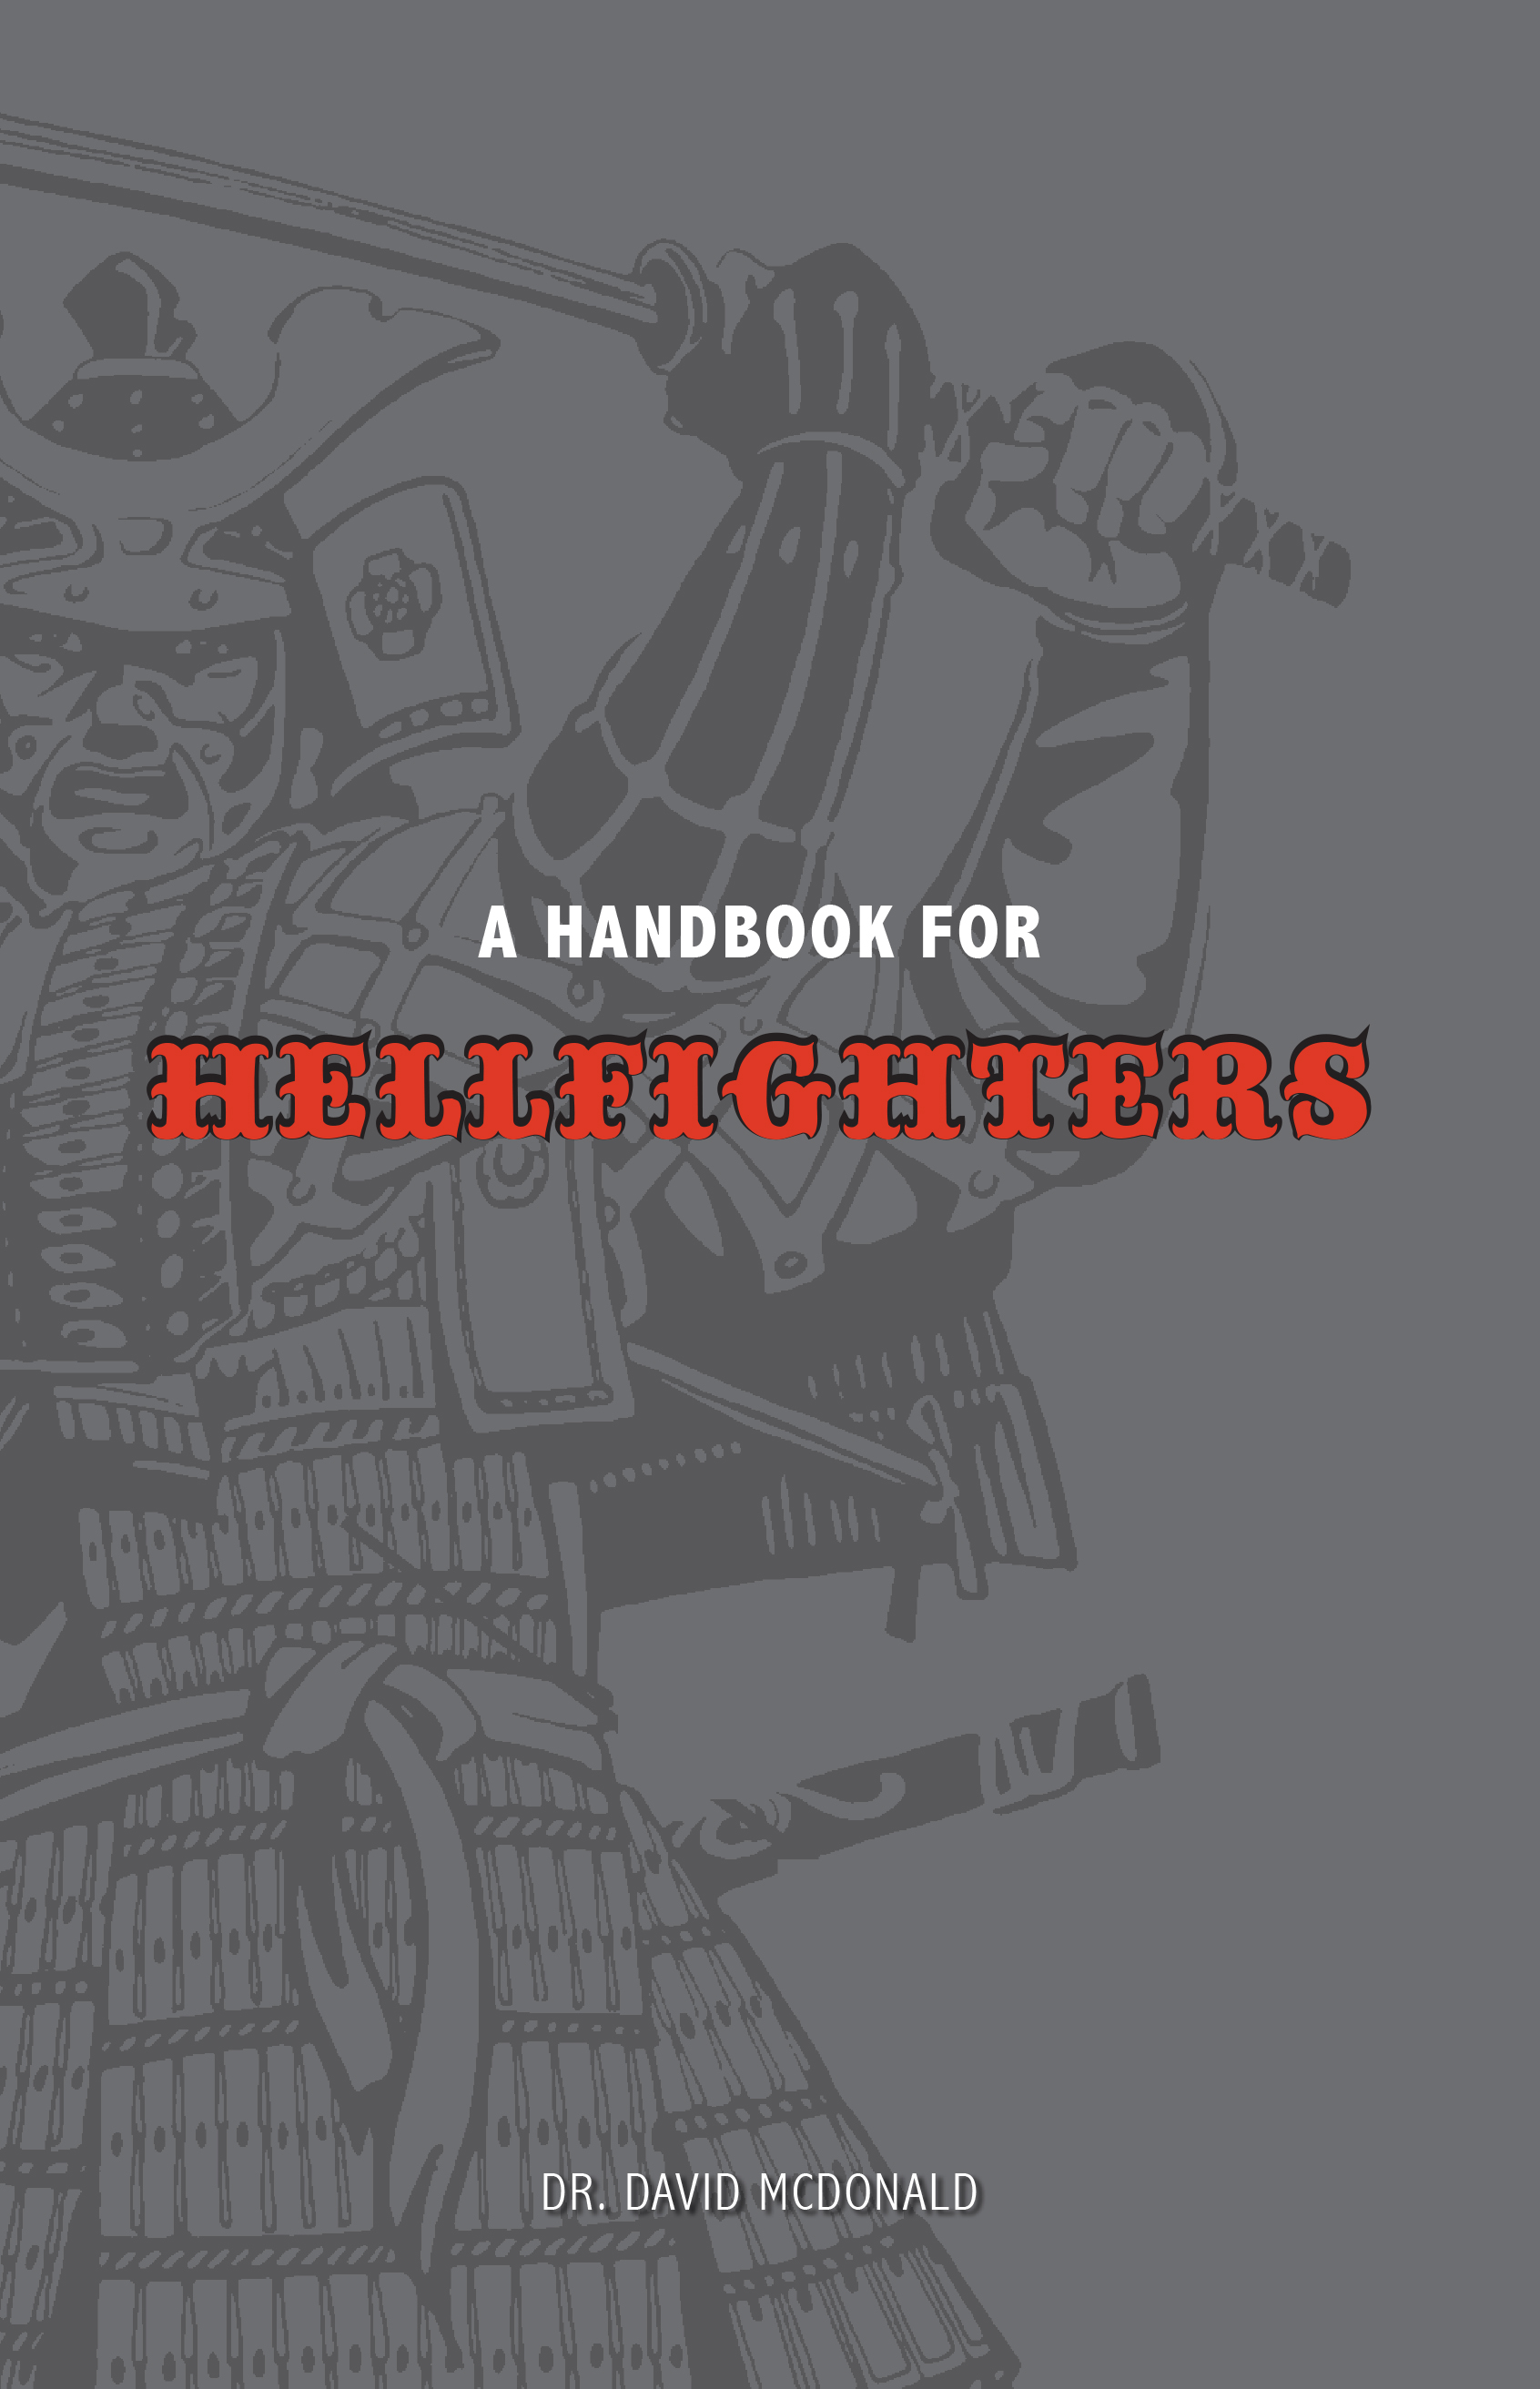 A Handbook for Hellfighters- now available!